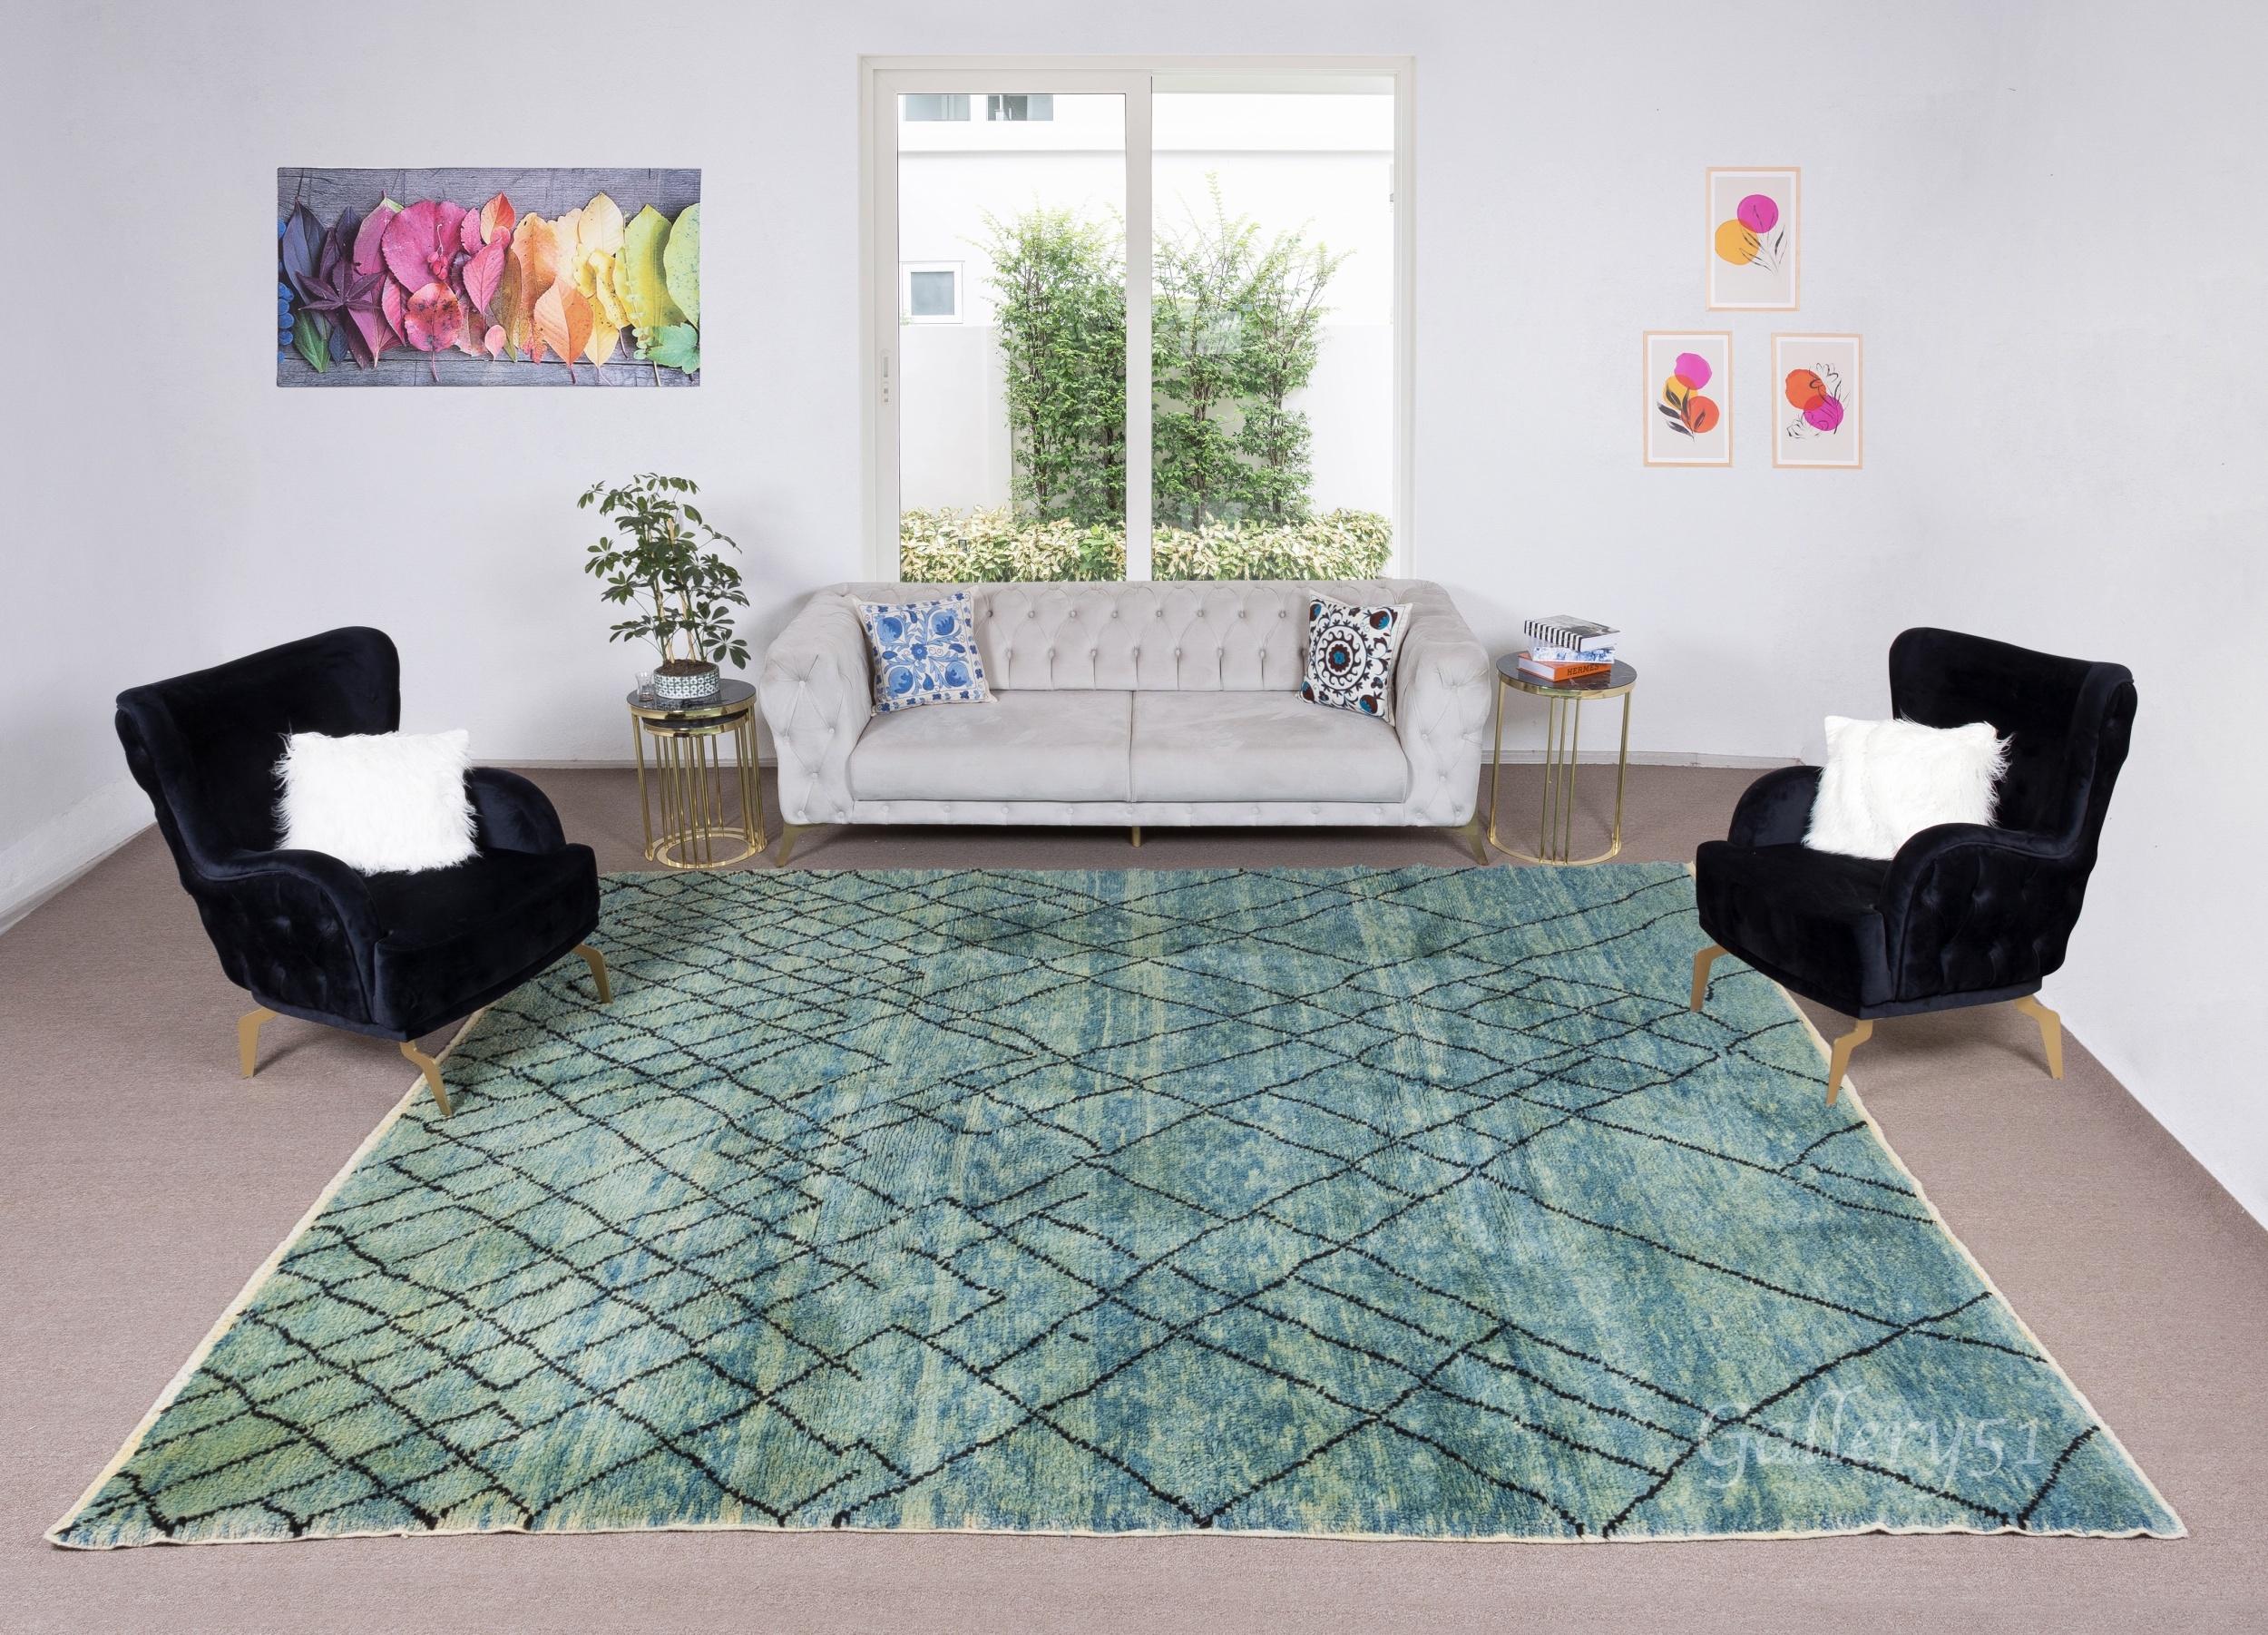 100% Natural Hand-Spun Wool of finest quality.

Available as seen or can be CUSTOM PRODUCED in any Design, Size, Color Combination and Pile Thickness requested. 

These beautiful hand-knotted rugs are produced from scratch in our atelier located in